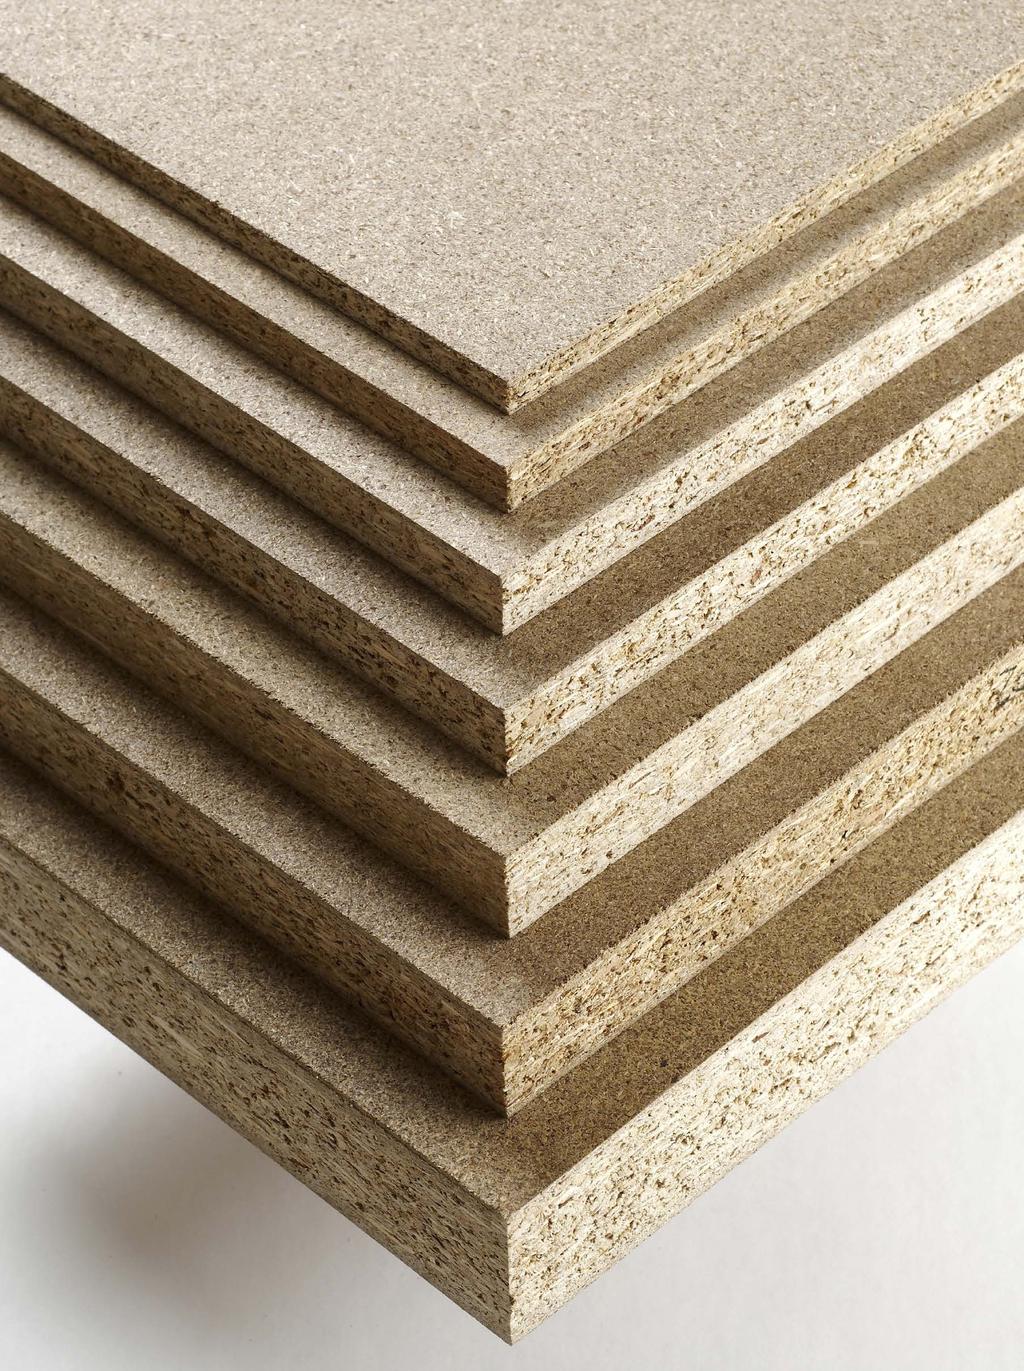 AMERICAN WOOD COUNCIL CANADIAN WOOD COUNCIL The American Wood Council (AWC) and Canadian Wood Council (CWC) are pleased to present this Environmental Product Declaration (EPD) for particleboard.